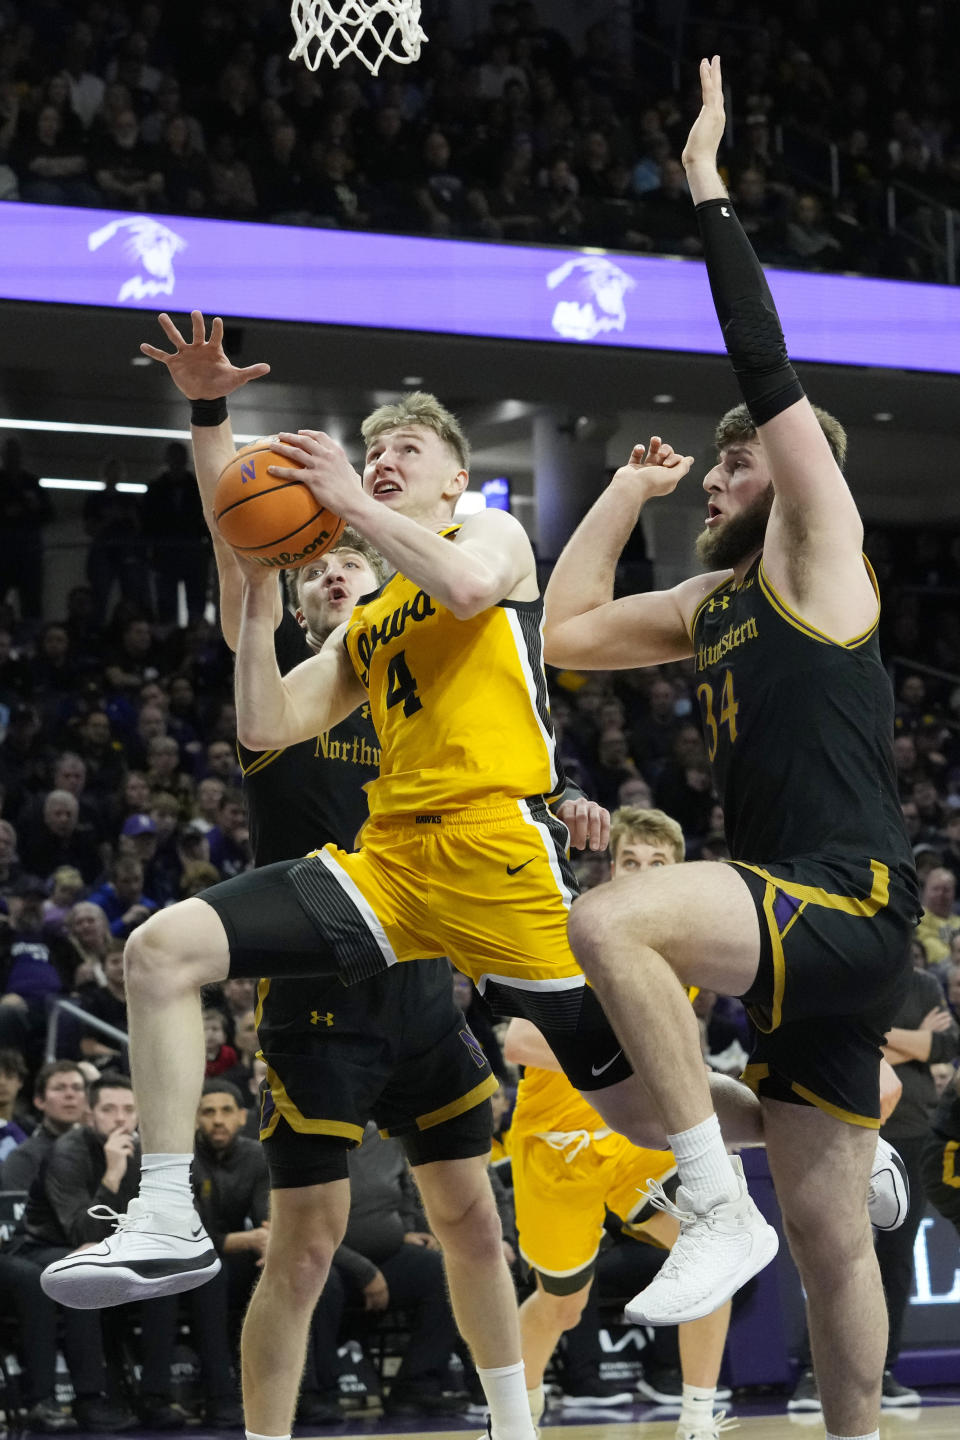 Iowa guard Josh Dix (4) drives to the basket against Northwestern forward Nick Martinelli, left, and center Matthew Nicholson during the first half of an NCAA college basketball game in Evanston, Ill., Saturday, March 2, 2024. (AP Photo/Nam Y. Huh)